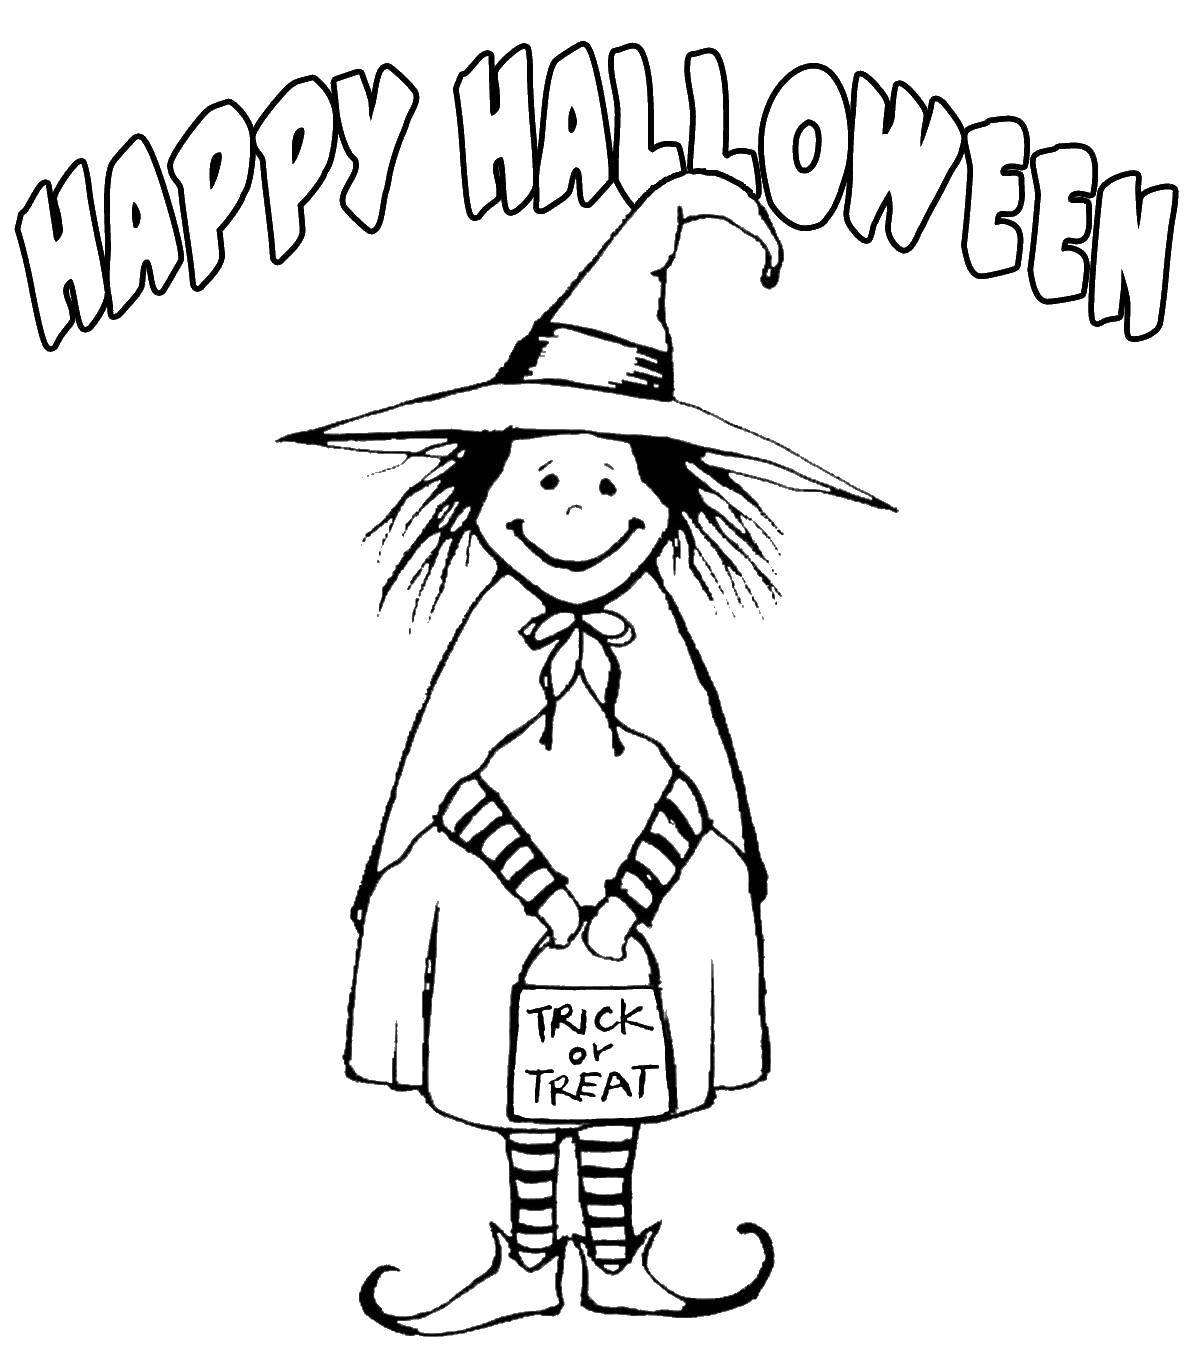 Coloring Congratulation on Halloween. Category Halloween. Tags:  witch, Halloween.